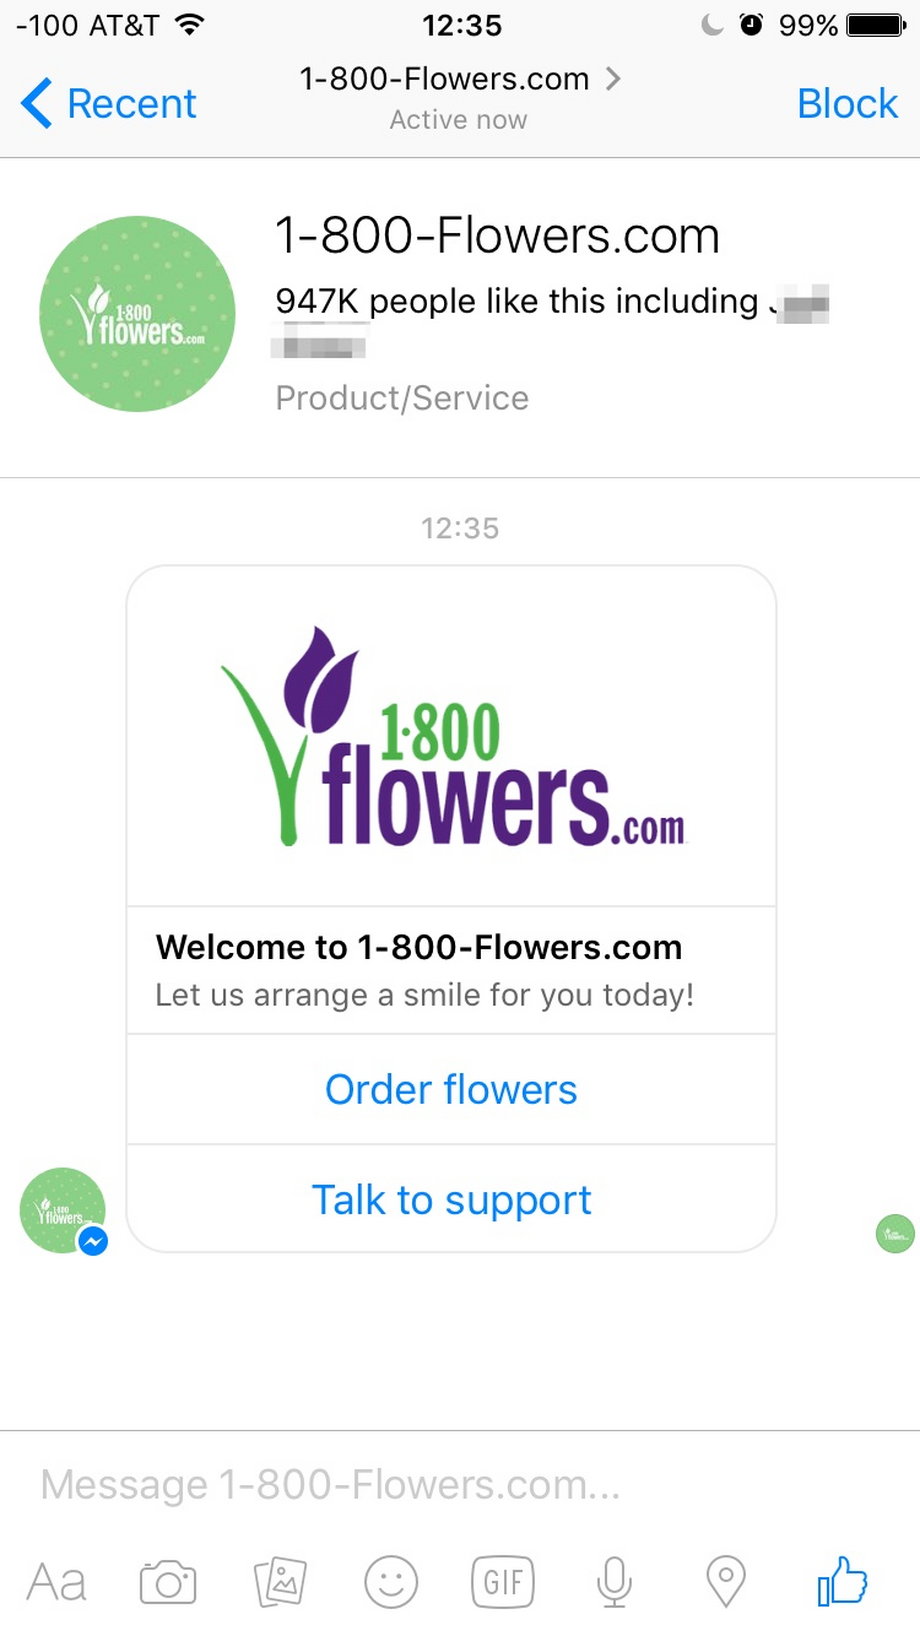 It's my mom's birthday, so I figured I'd order her some flowers from the 1-800-Flowers.com bot. Easy enough - just click "Order flowers."